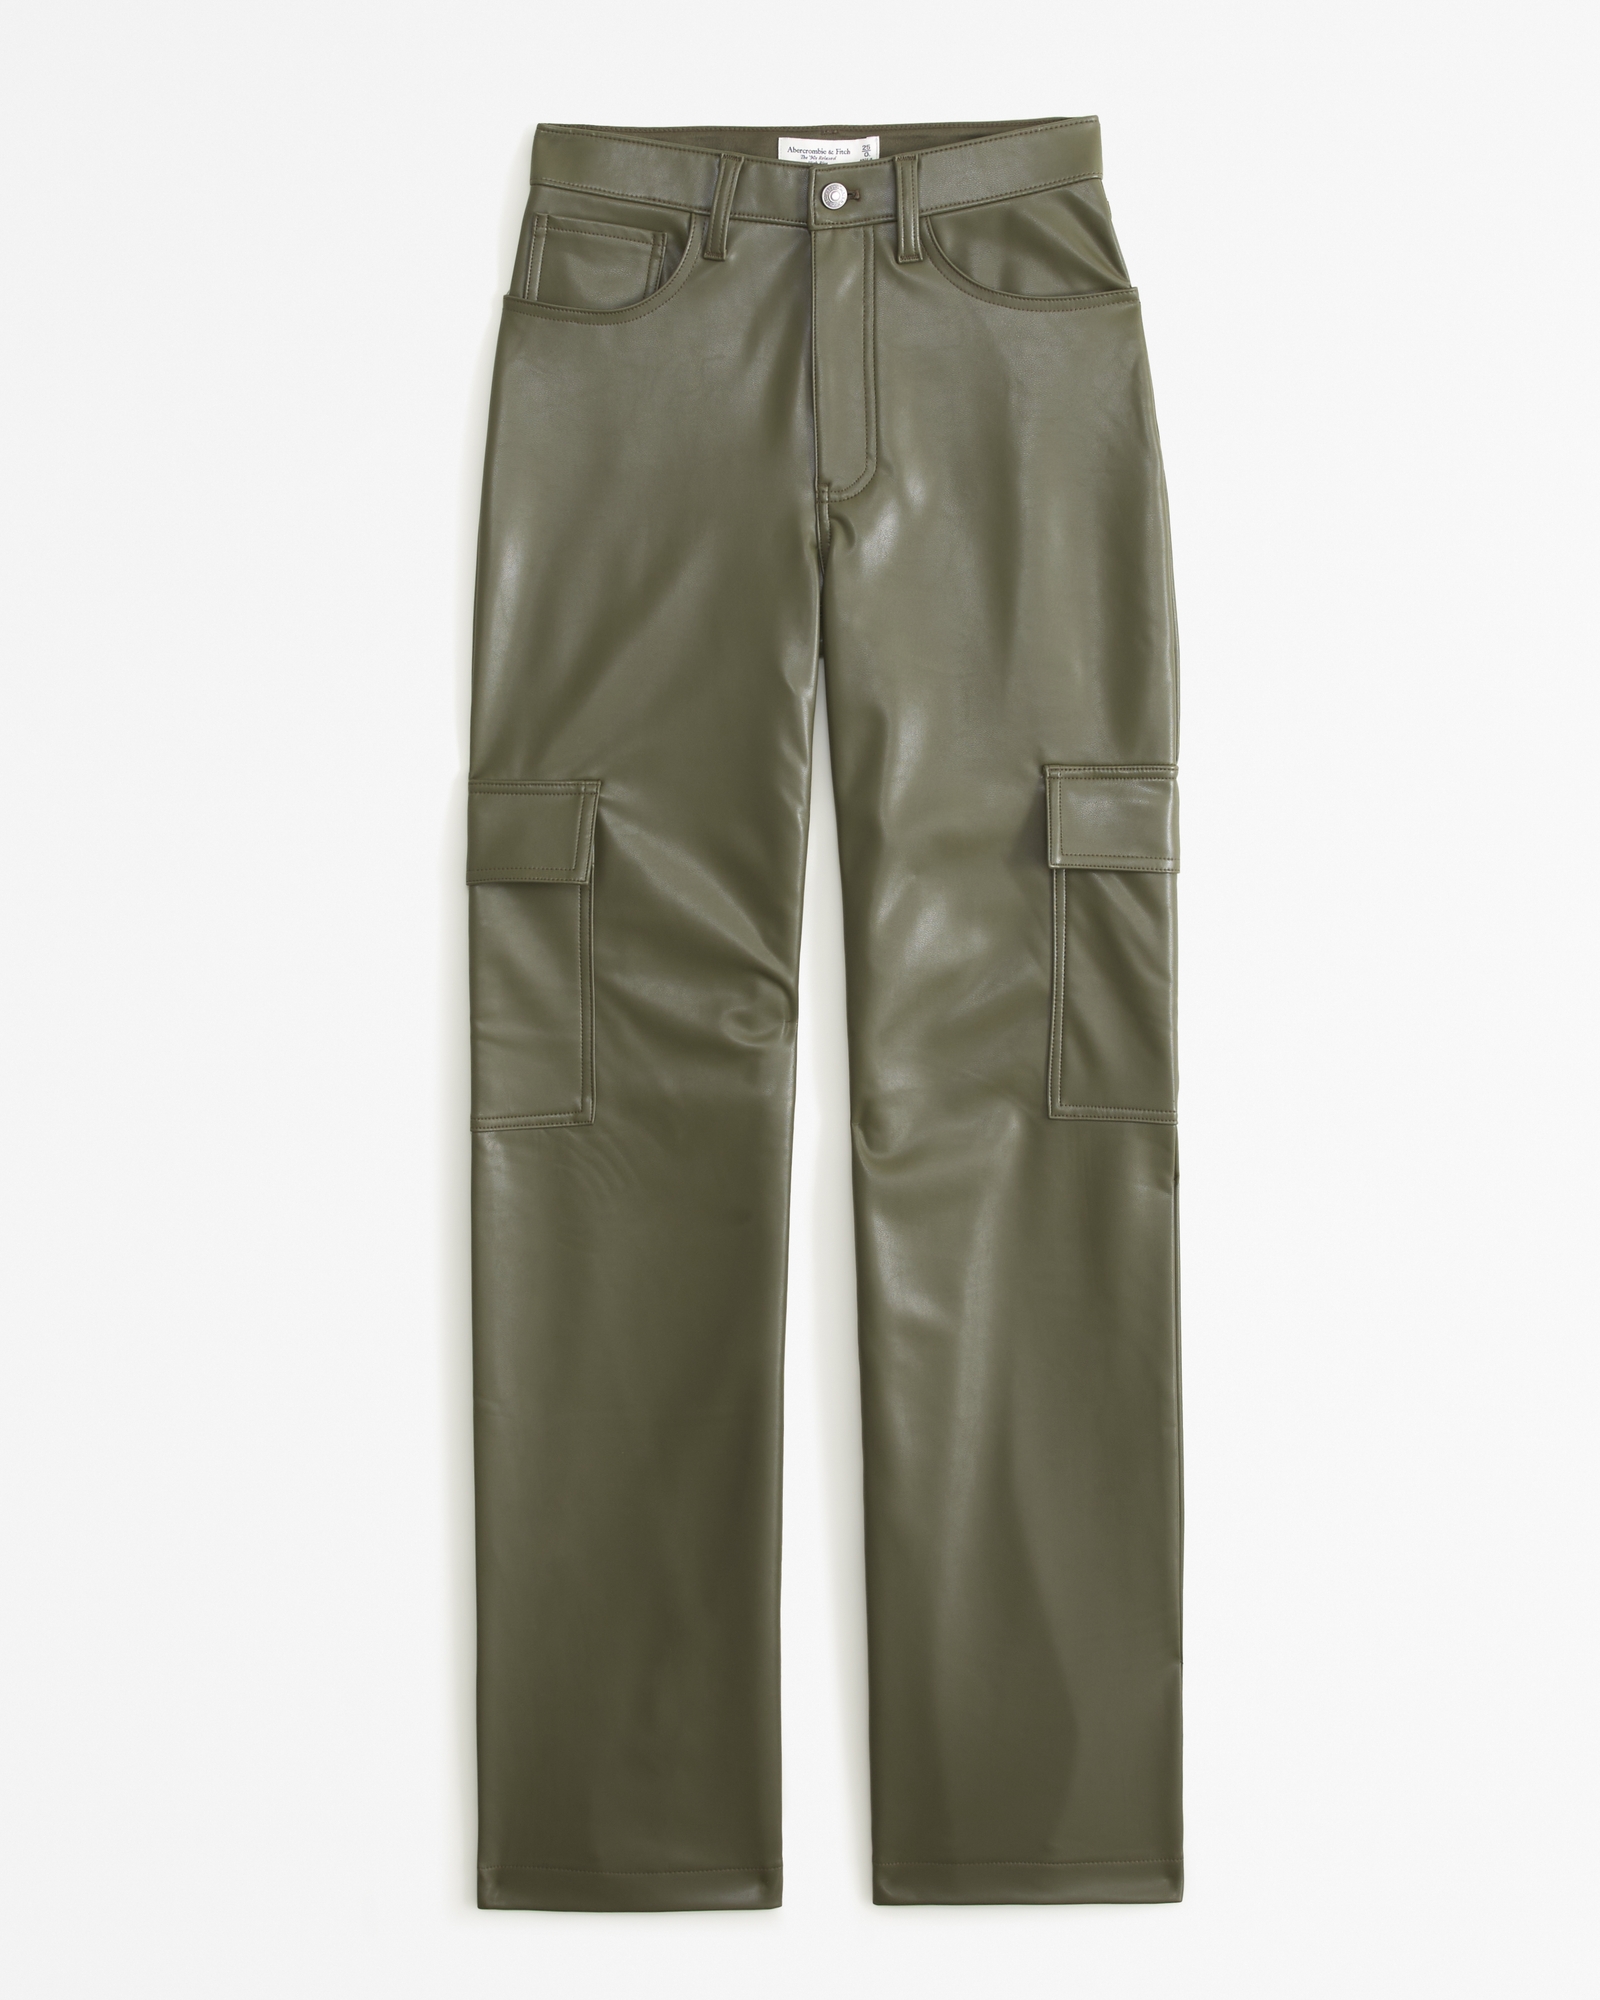 H&M CARGO REVIEW. ARE THEY WORTH $35!? 